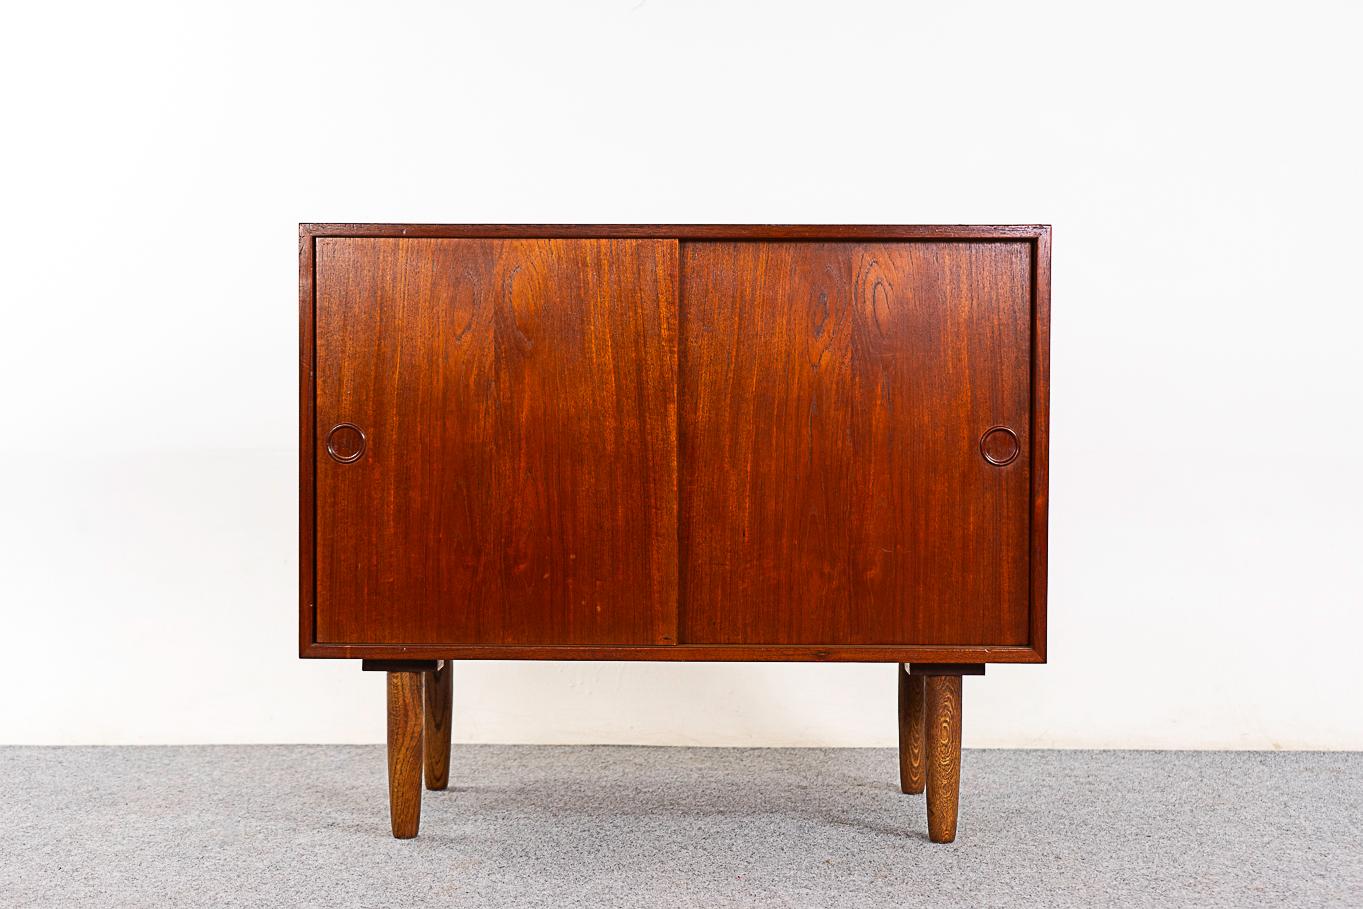 Teak Danish cabinet, circa 1960's. Clean, simple lined design with lovely book-matched veneer. Drawer and shelf are height adjustable. Contrasting solid oak legs.  

Unrestored item with option to purchase in restored condition for an additional